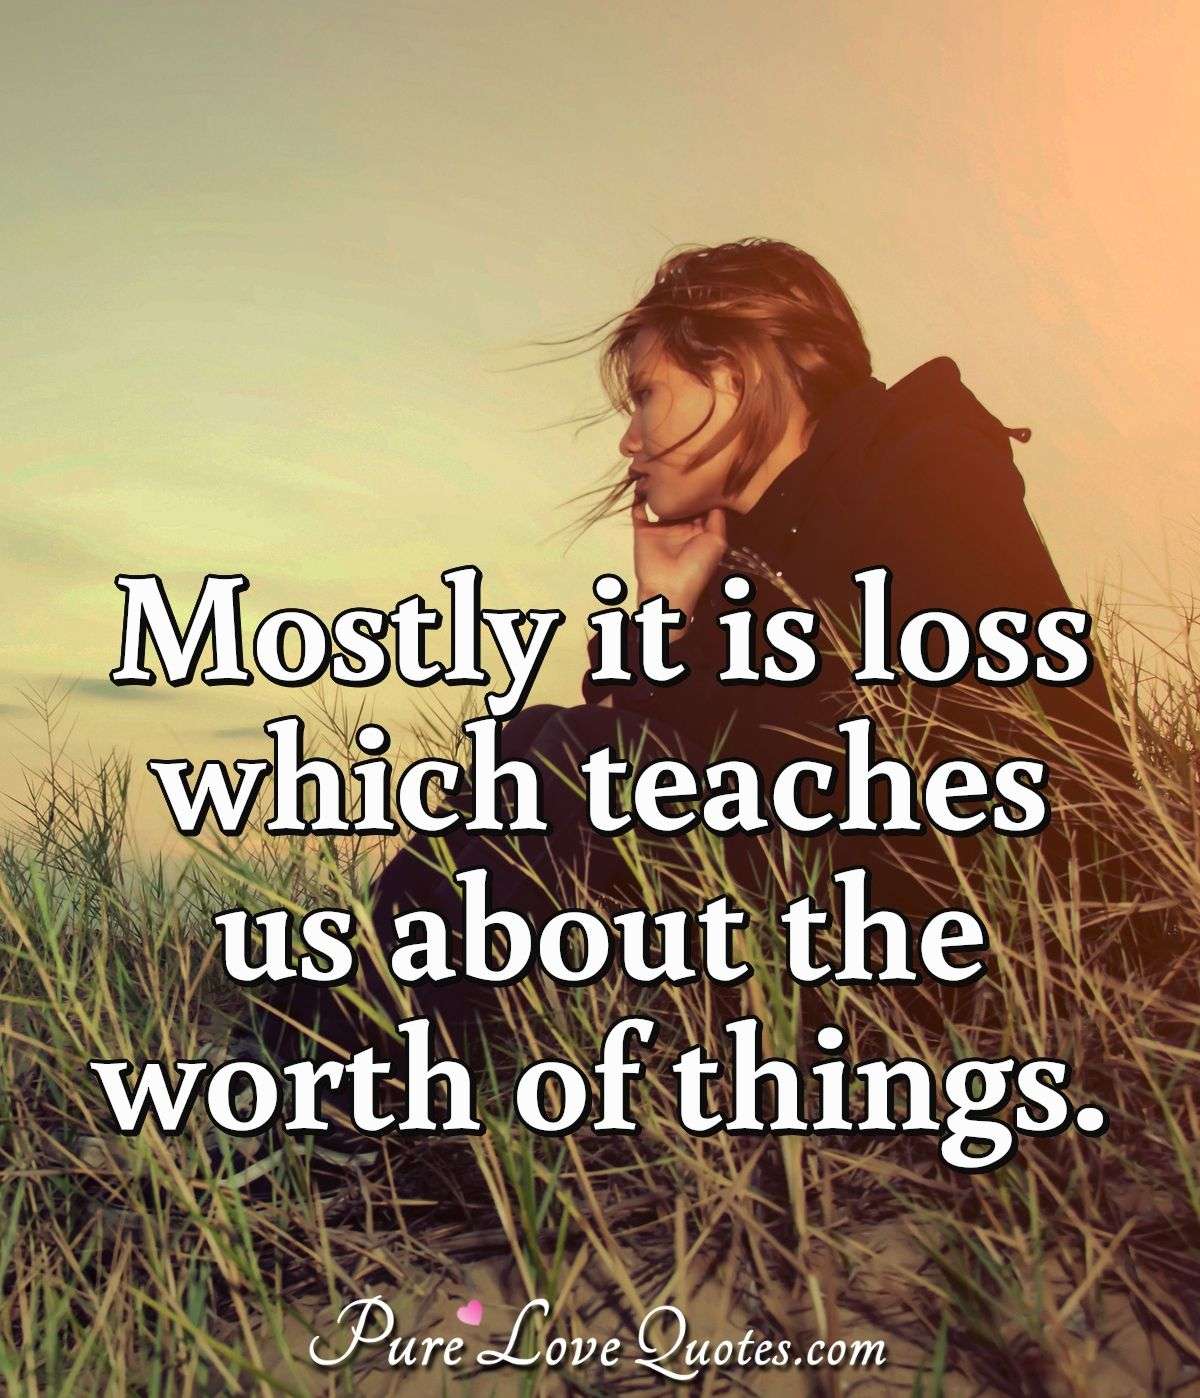 Mostly it is loss which teaches us about the worth of things. - Anonymous